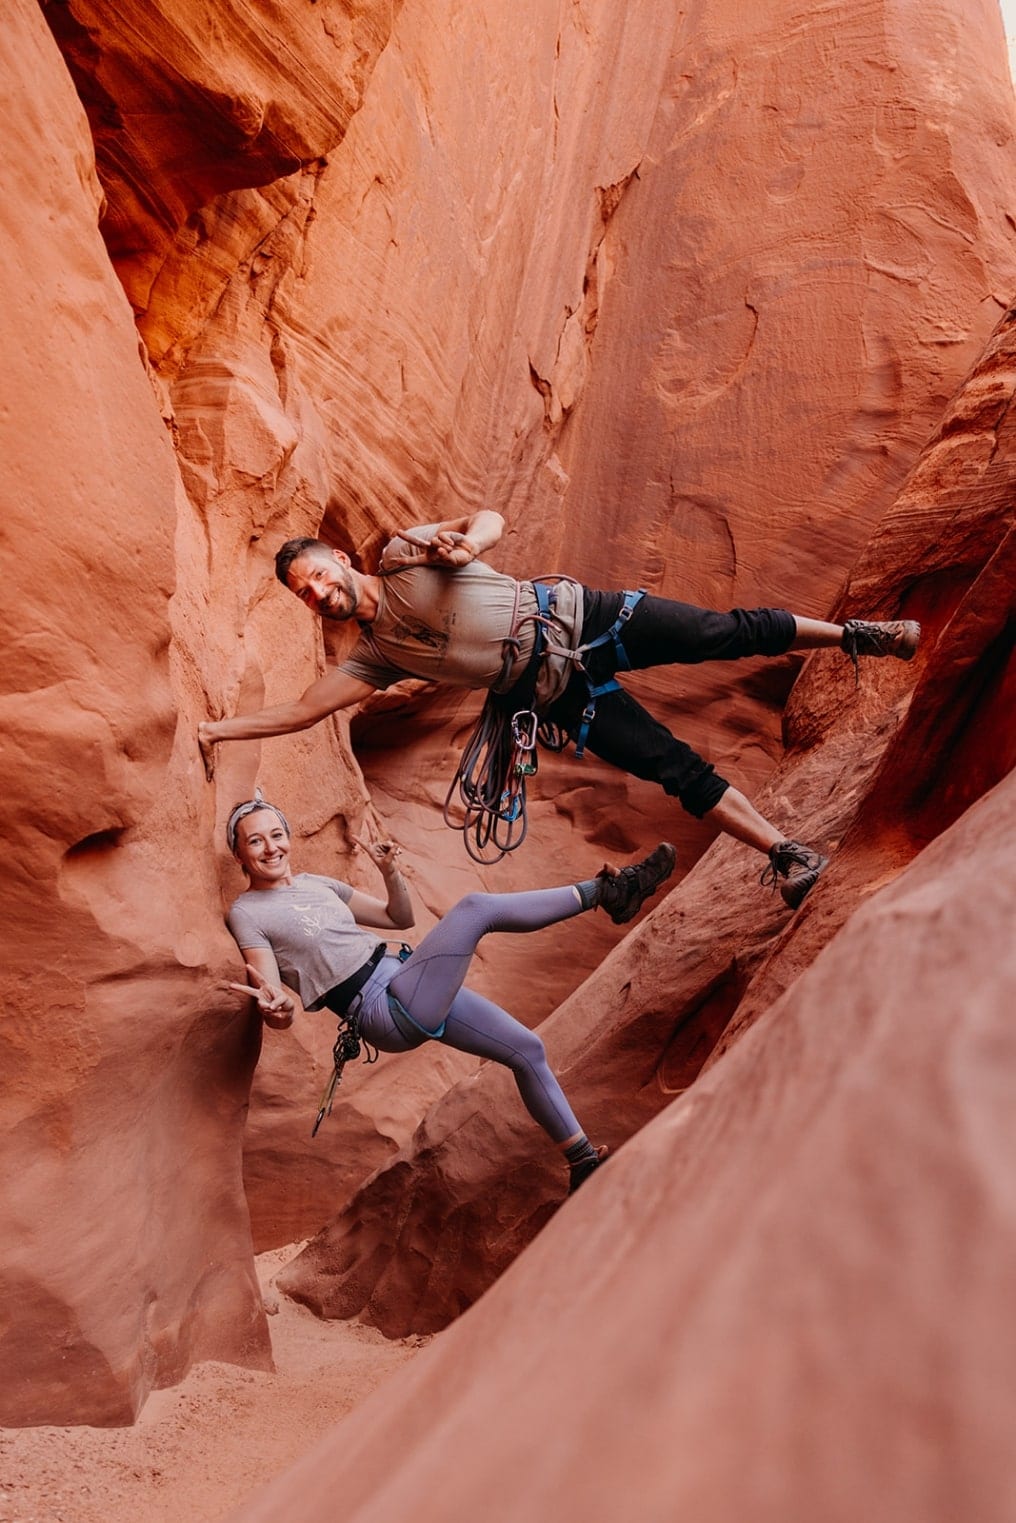 A portrait of an adventure elopement photography team in a slot canyon.